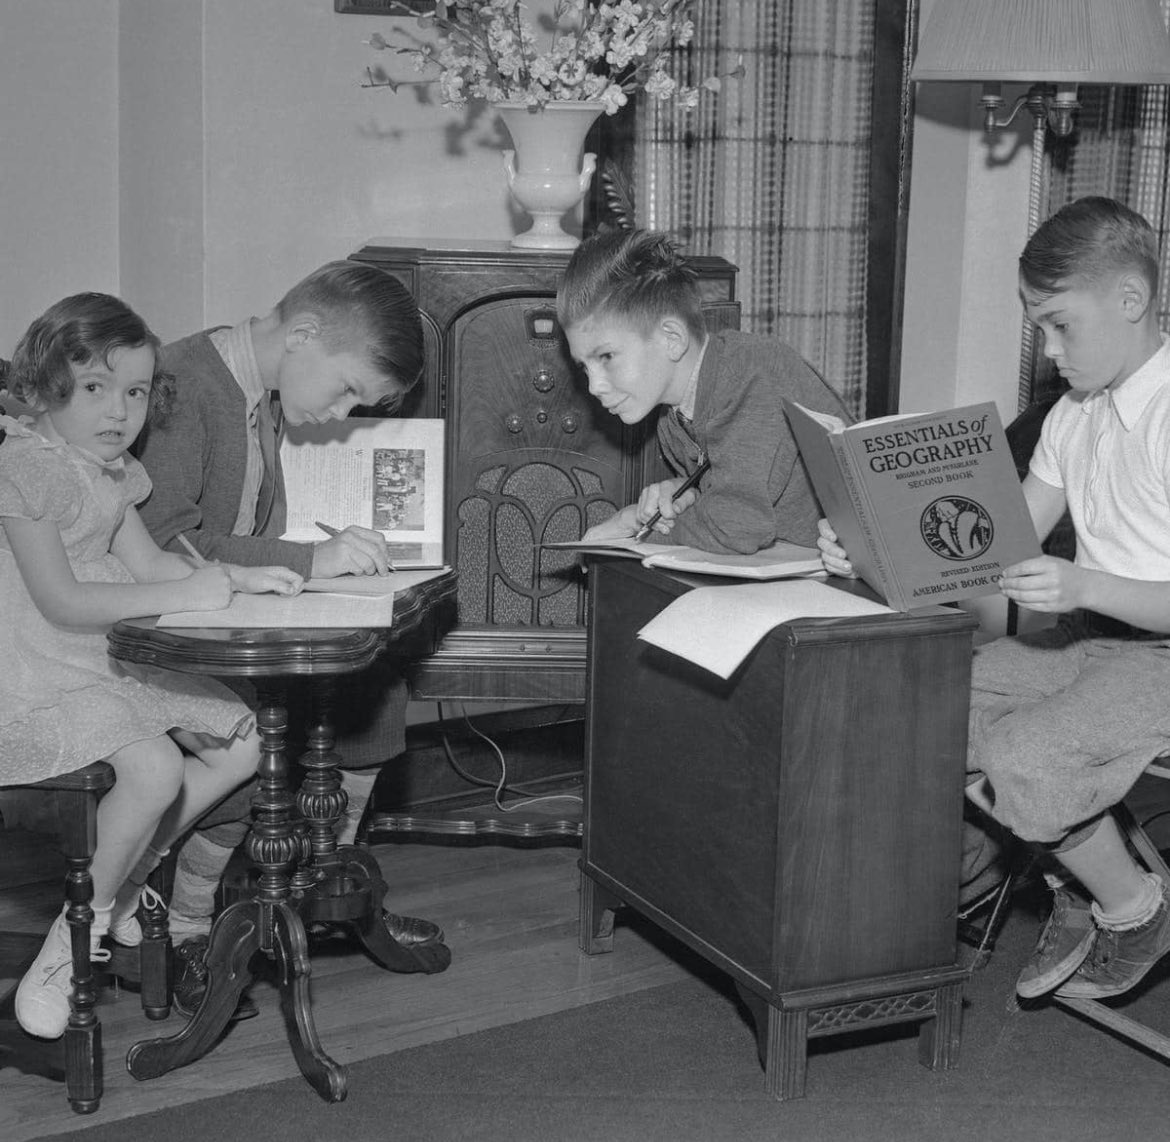 Remote learning during the 1937 polio epidemic in Chicago was necessitated by the absence of a polio cure, coupled with its high contagiousness. As a result, school openings were postponed, and students were required to remain at home. Over 300,000 students in grades three to